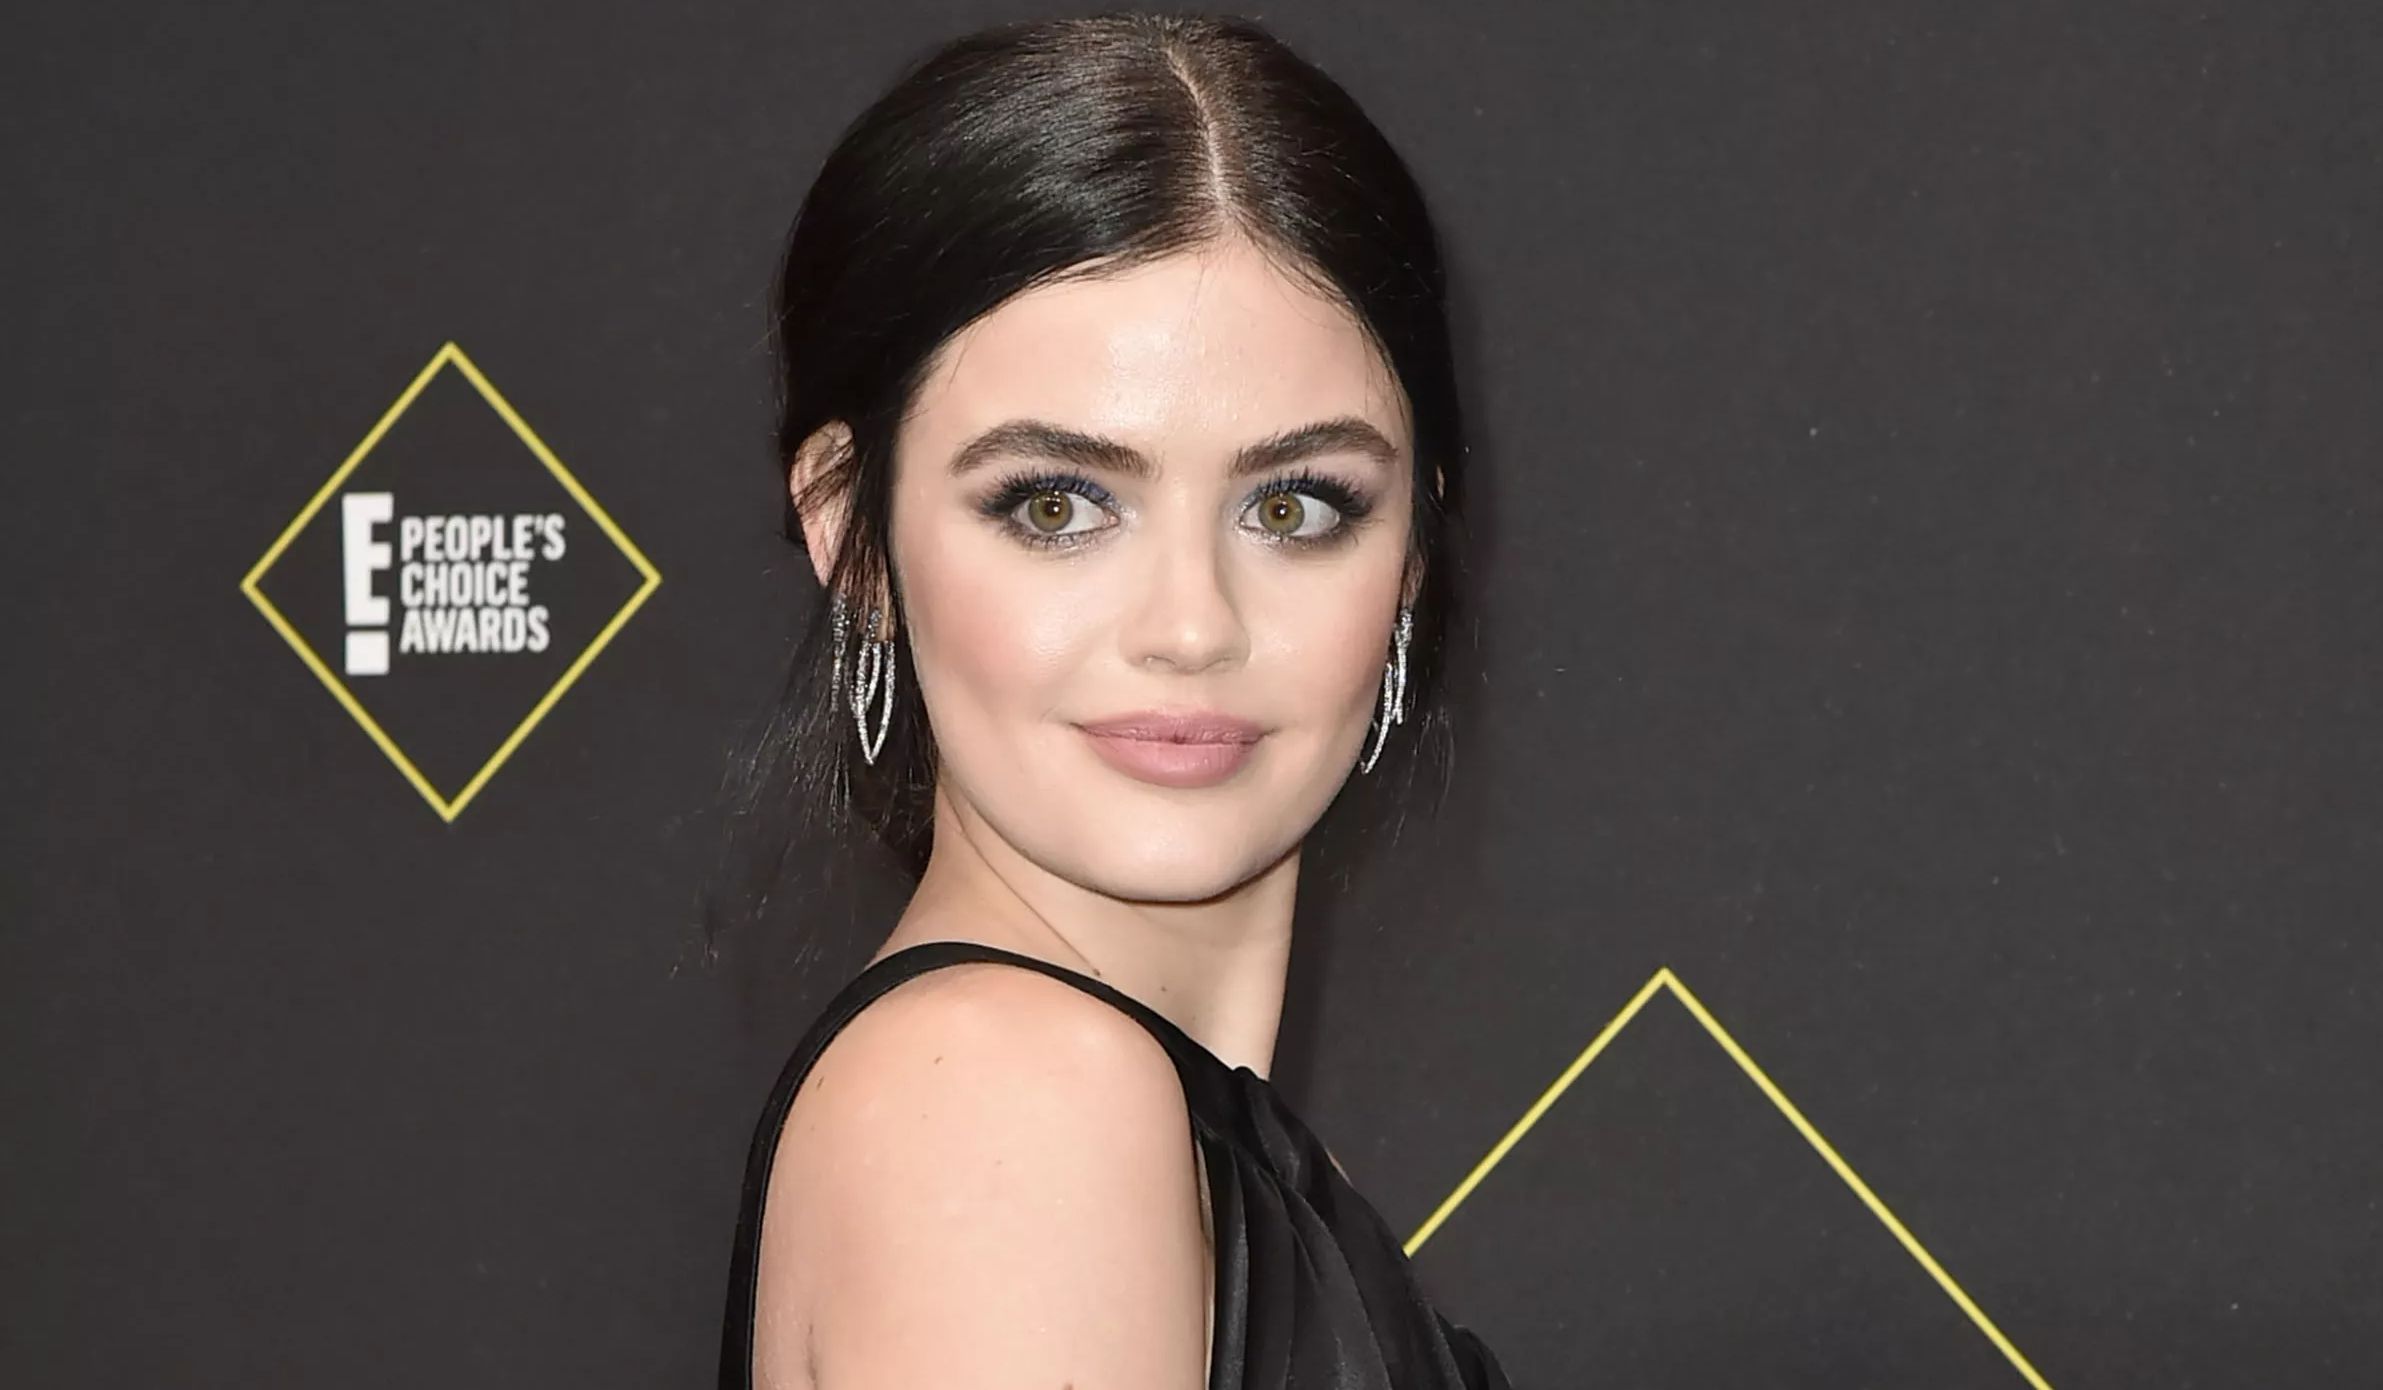 Lucy Hale poses at an event. 